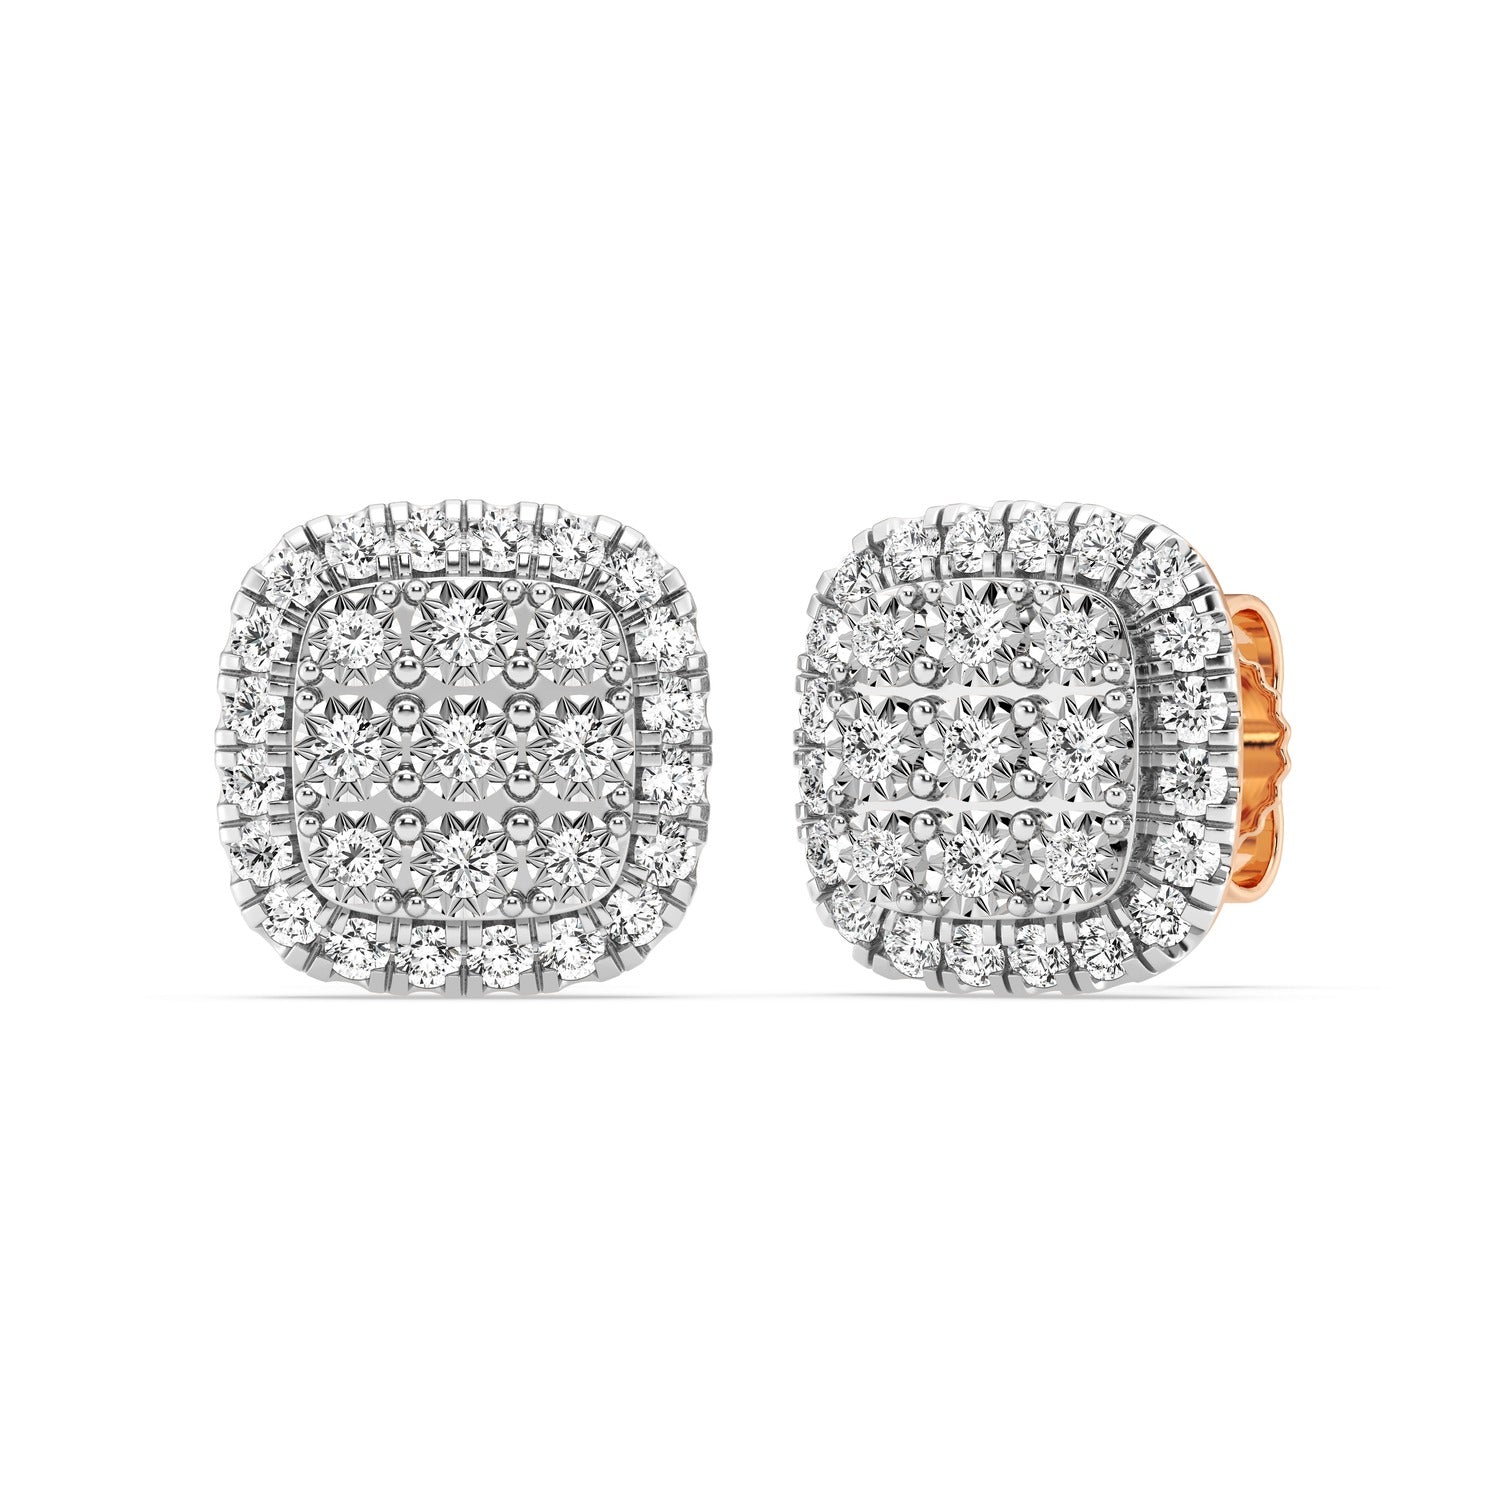 Miracle Halo Earrings with 1/2ct of Diamonds in 9ct Rose Gold Earrings Bevilles 